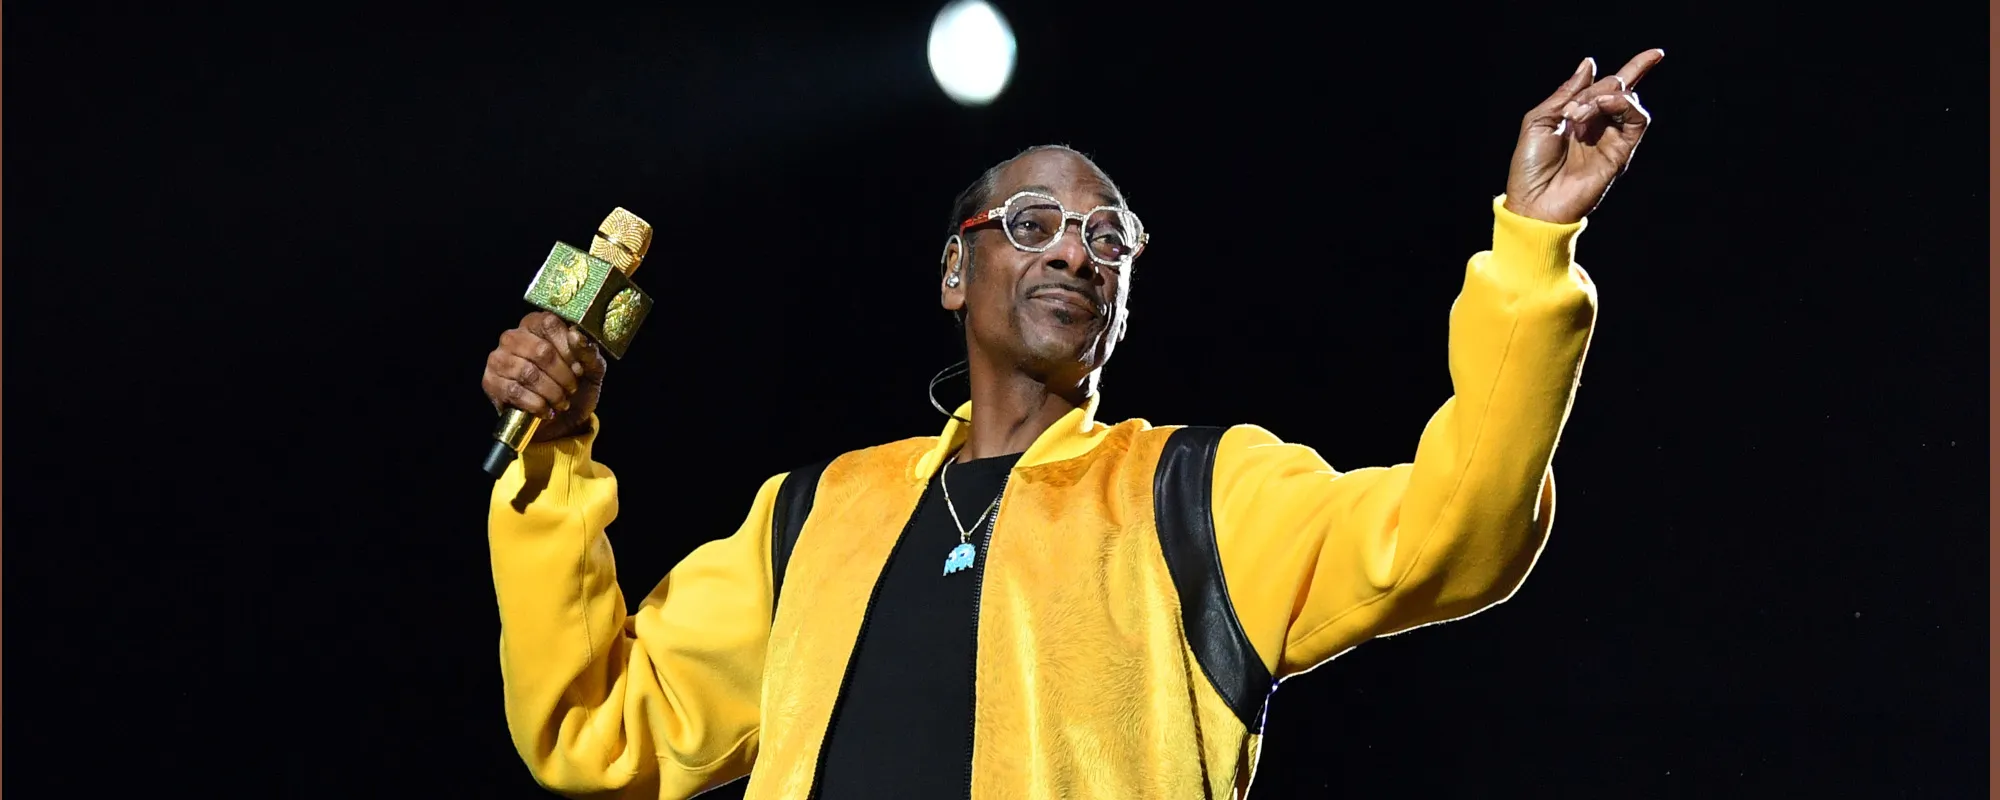 Snoop Dogg Cancels Shows to Support Writer, Actor Strikes